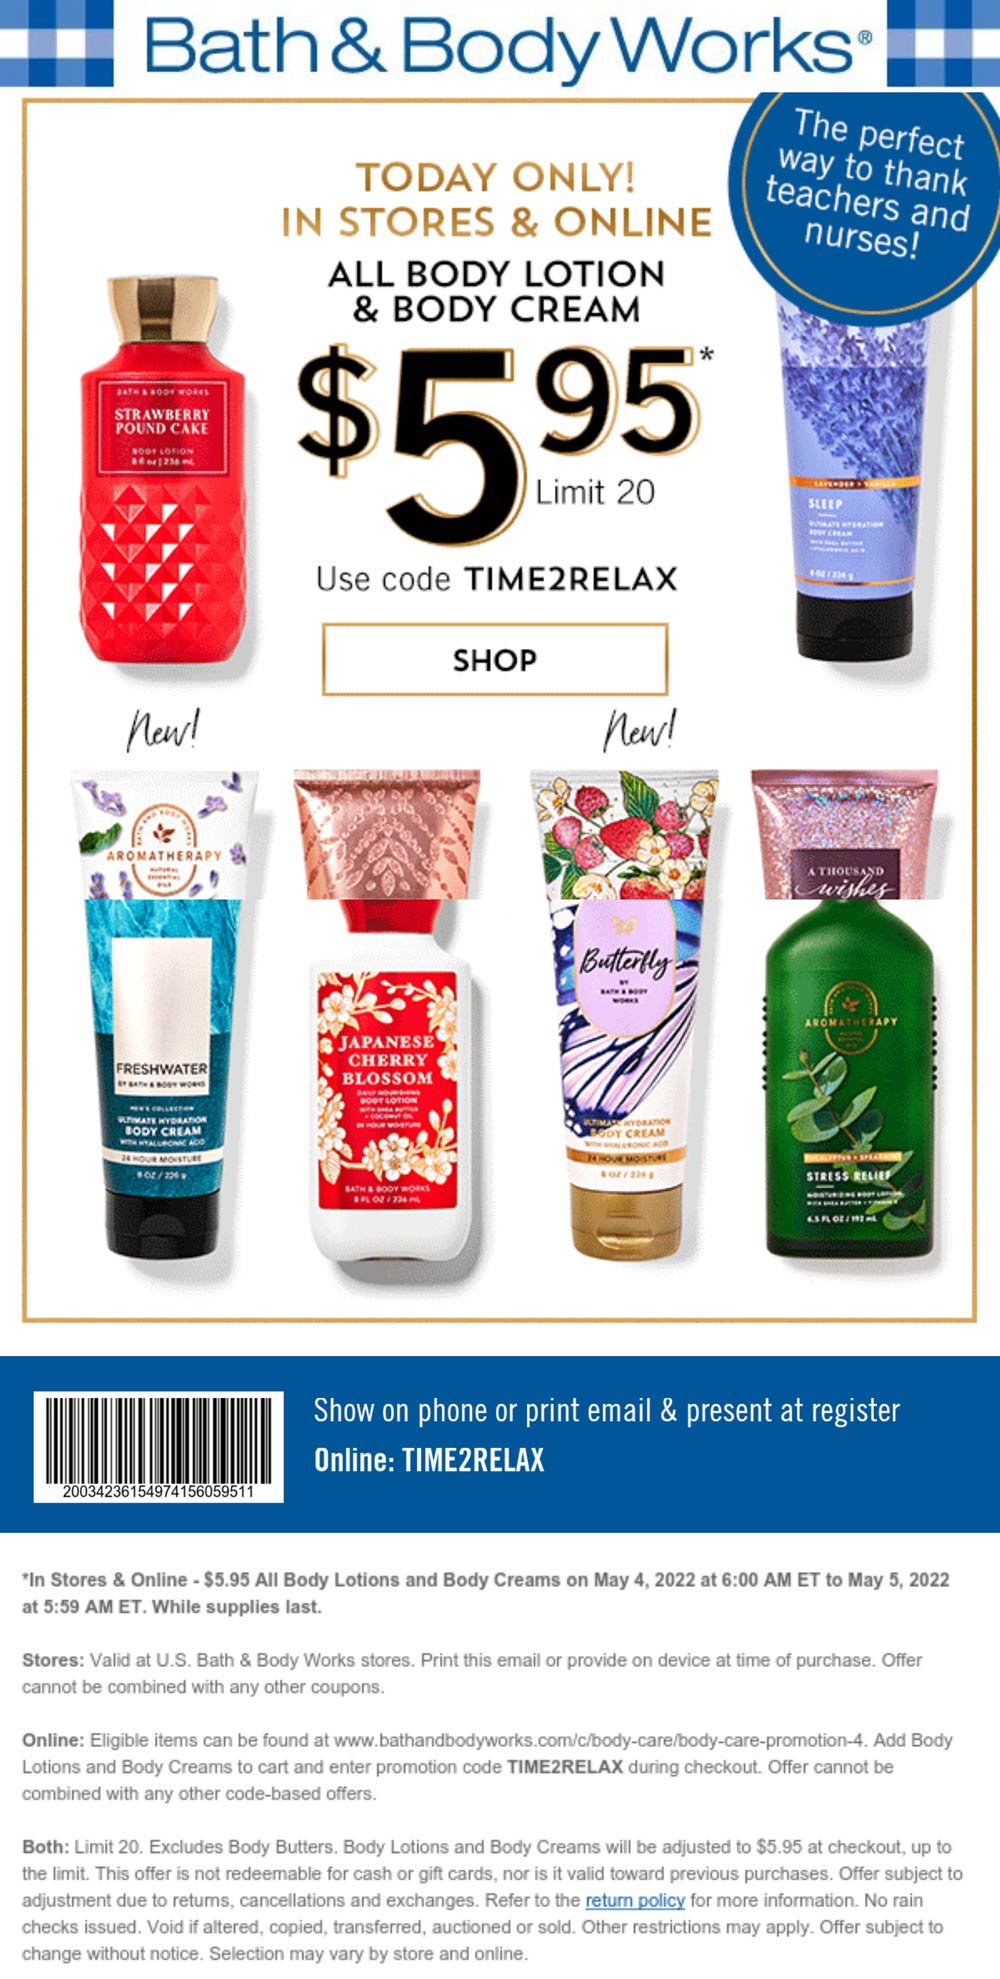 Bath & Body Works stores Coupon  $6 body lotion or creams today at Bath & Body Works, or online via promo code TIME2RELAX #bathbodyworks 